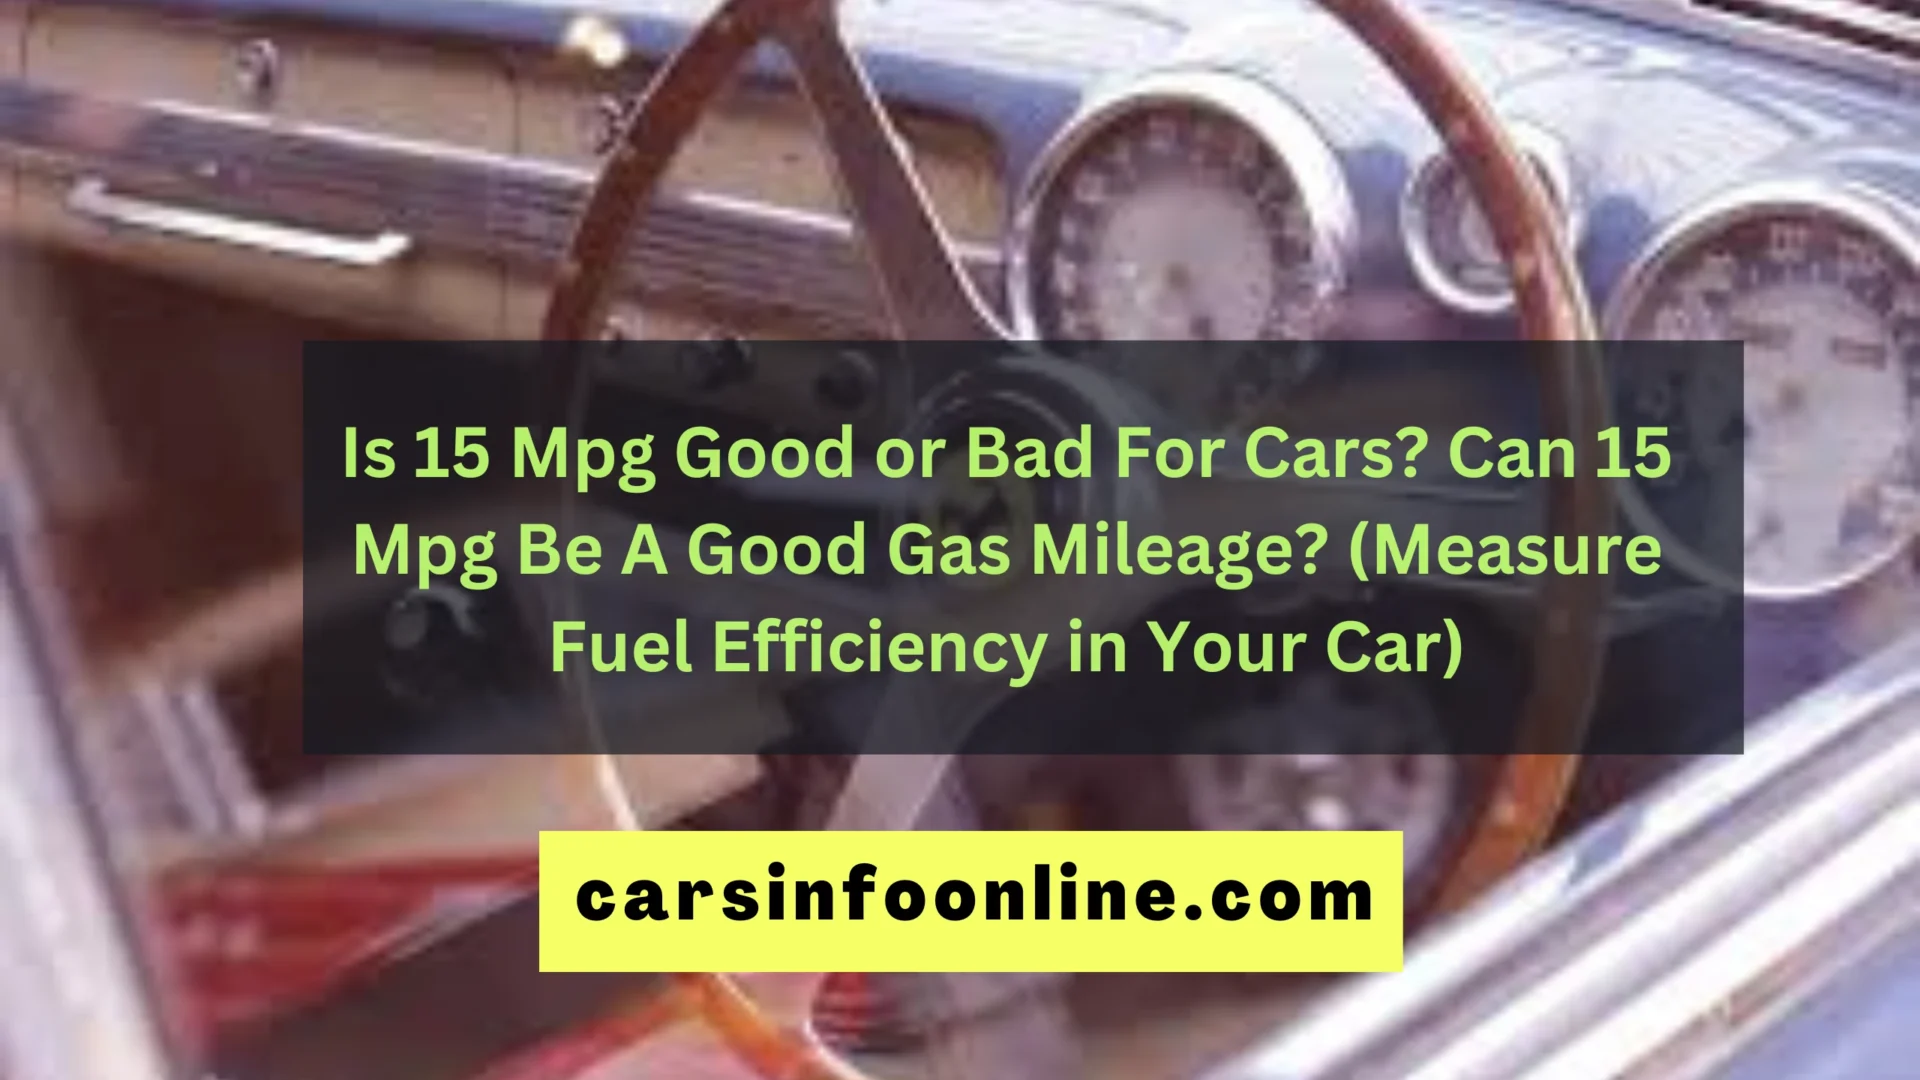 Is 15 Mpg Good or Bad For Cars Can 15 Mpg Be A Good Gas Mileage (Measure Fuel Efficiency in Your Car)